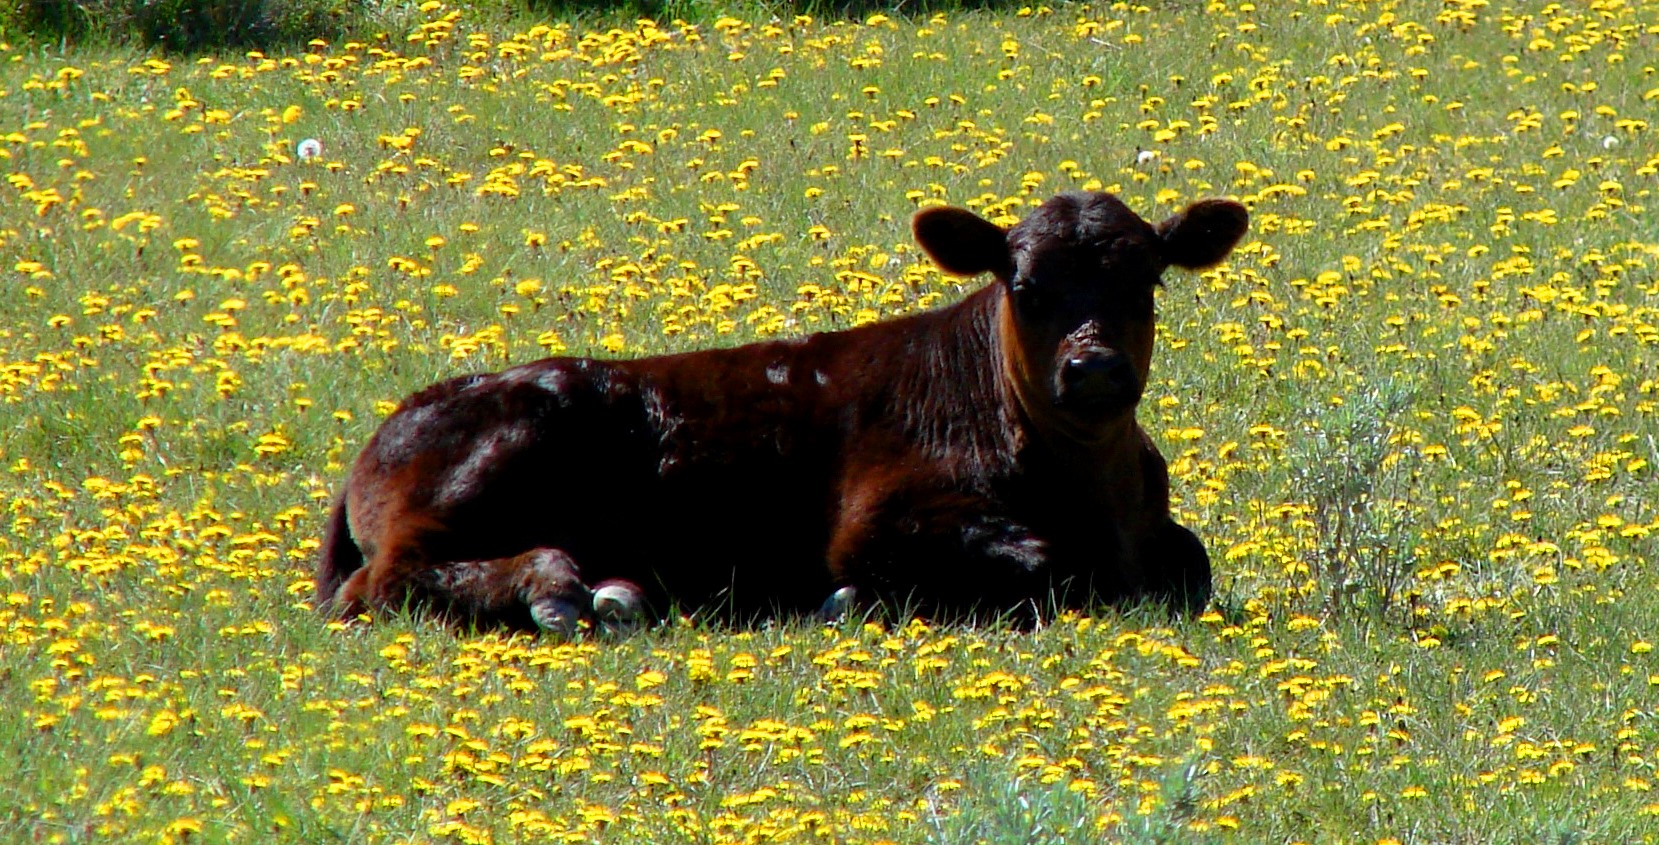 resting in the dandelions, cropped